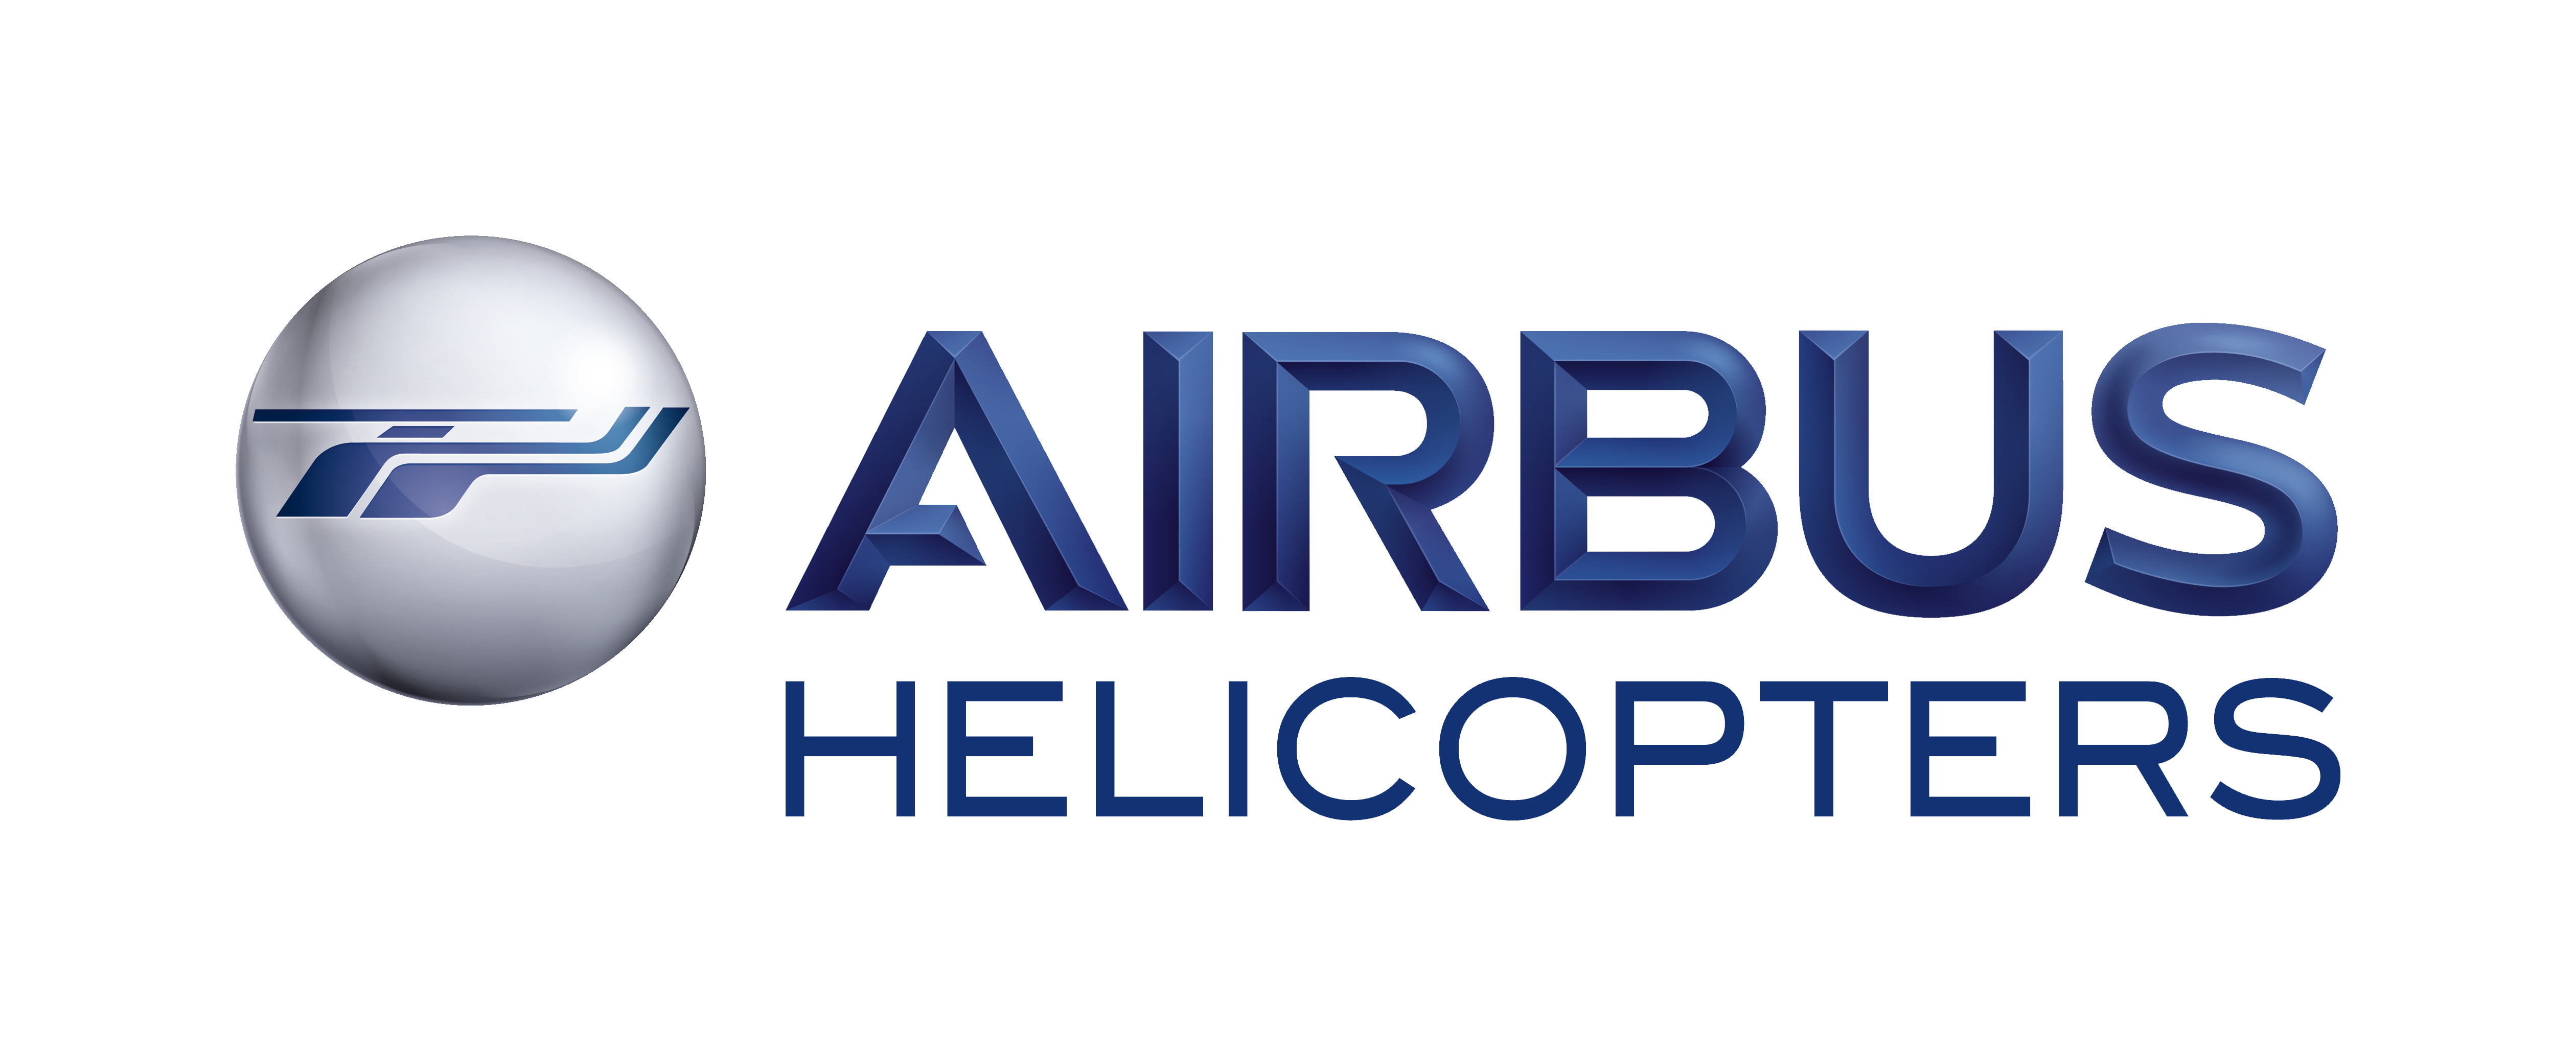 AIRBUS-HELICOPTER logo